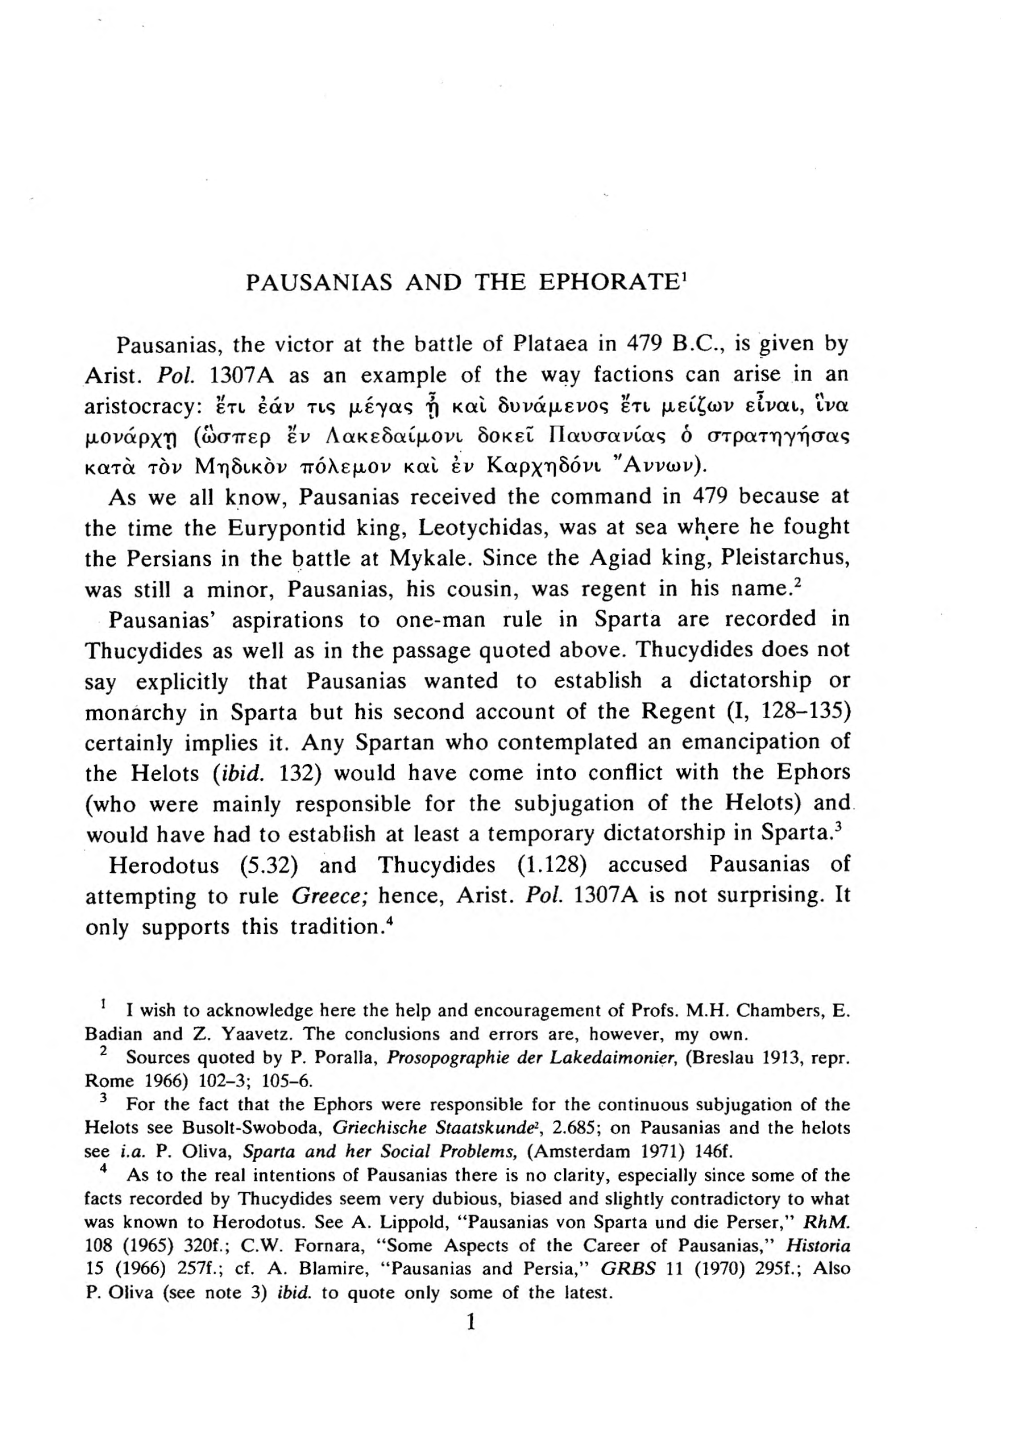 PAUSANIAS and the EPHORATE' Pausanias, the Victor at the Battle Of